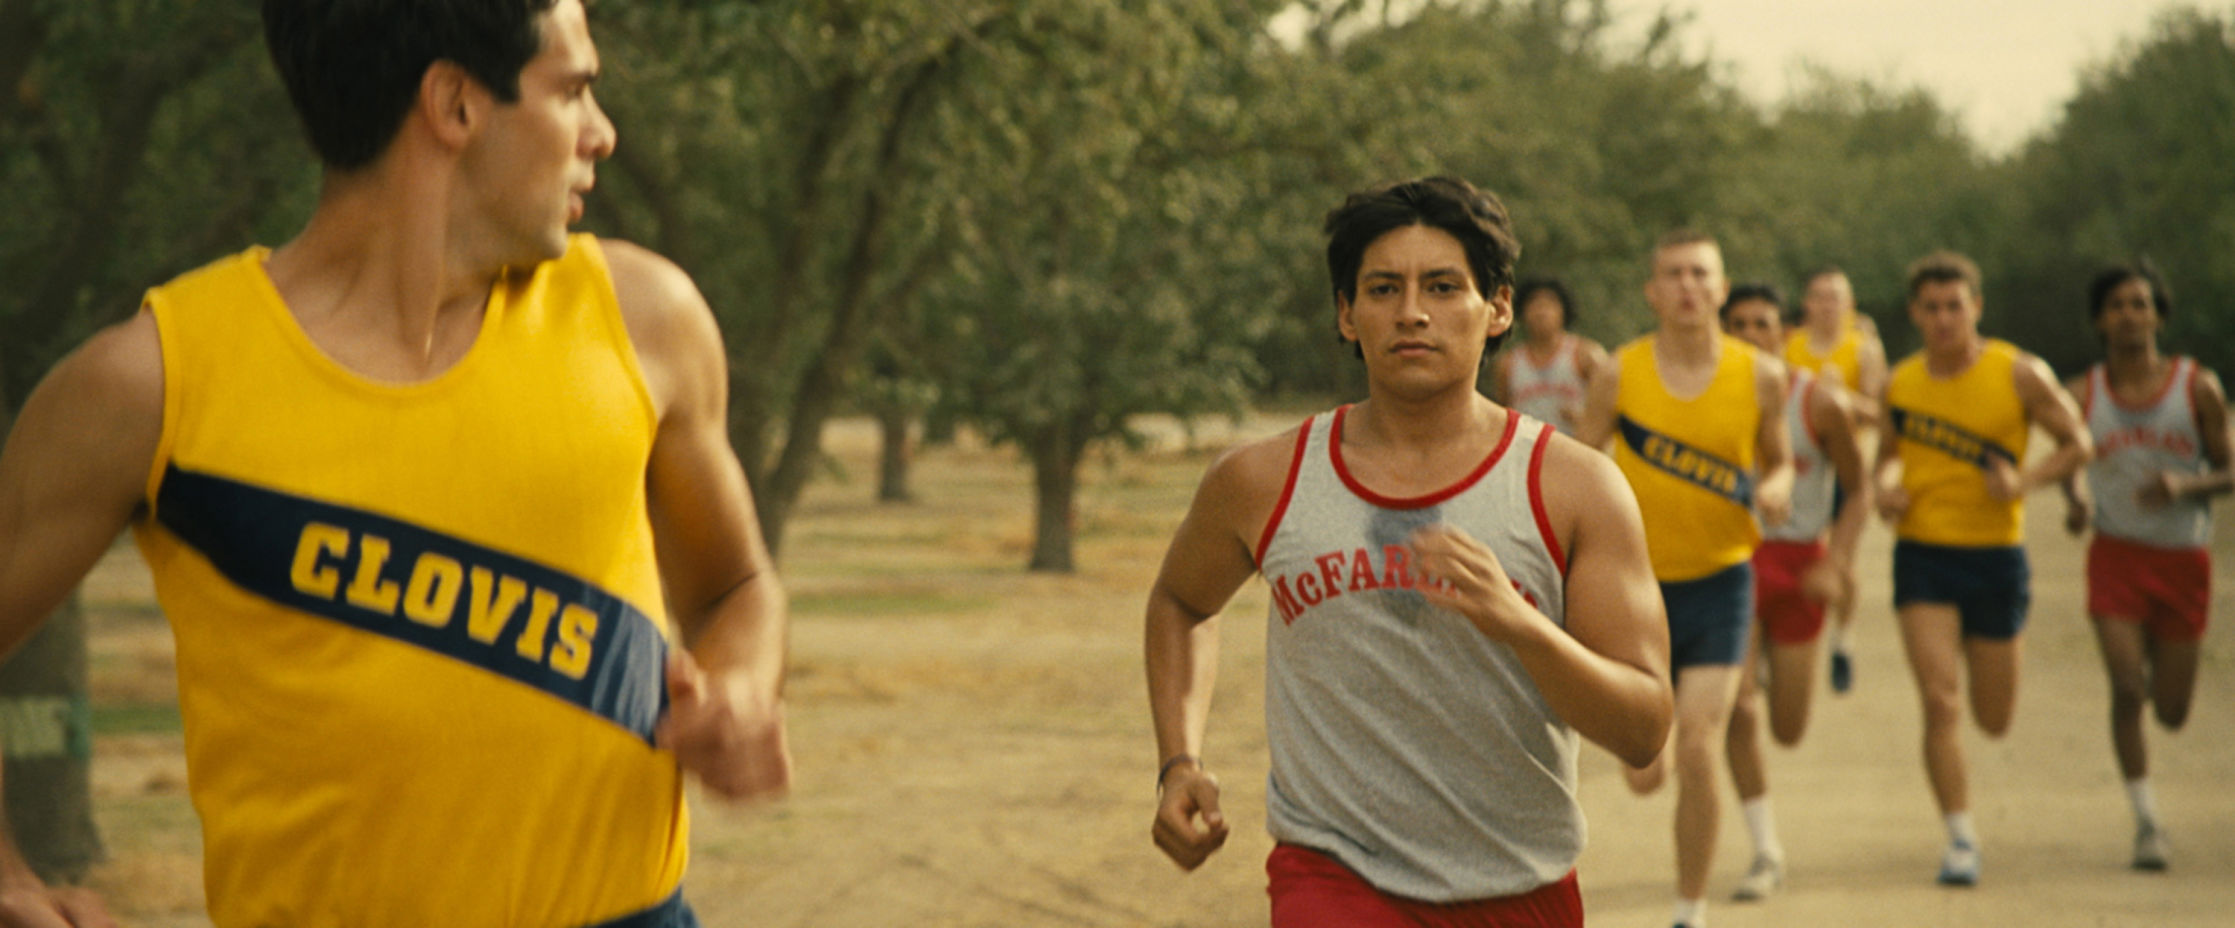 Movie review McFarland, USA is a winning film for families Local News timesnews